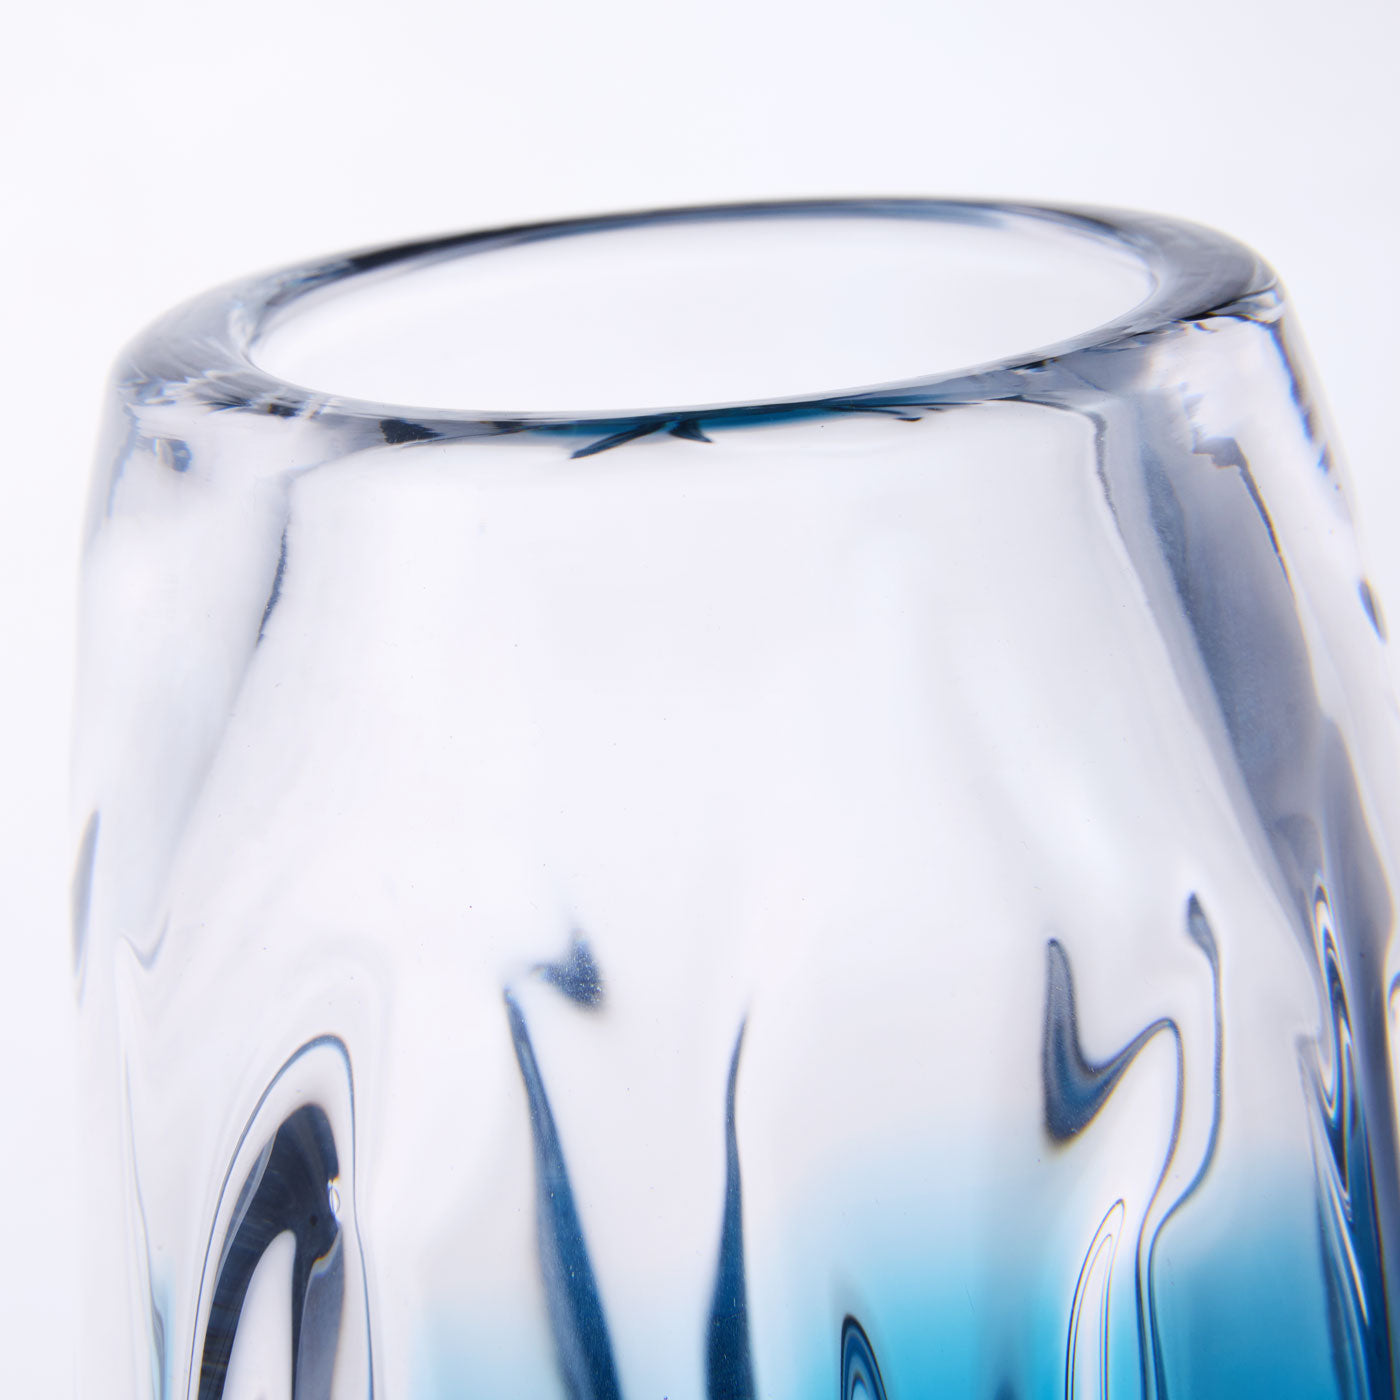 Hand Blown Laine Art Glass Vase - Blue Ombre 10-12.5 inch tall